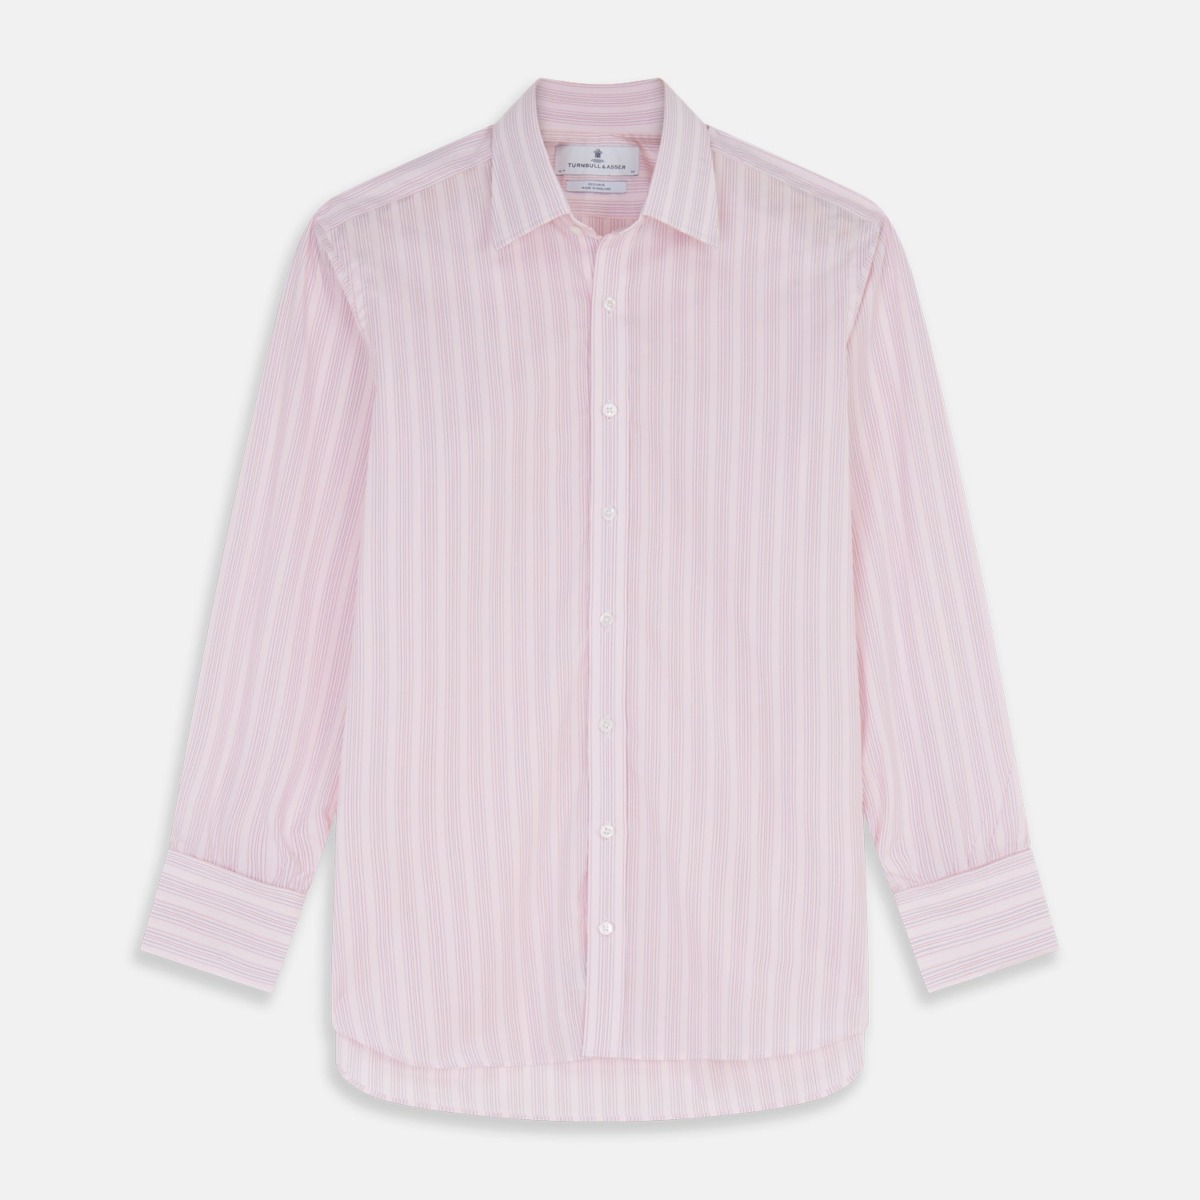 Turnbull And Asser Gent Shirt Pink by Turnbull & Asser GOOFASH